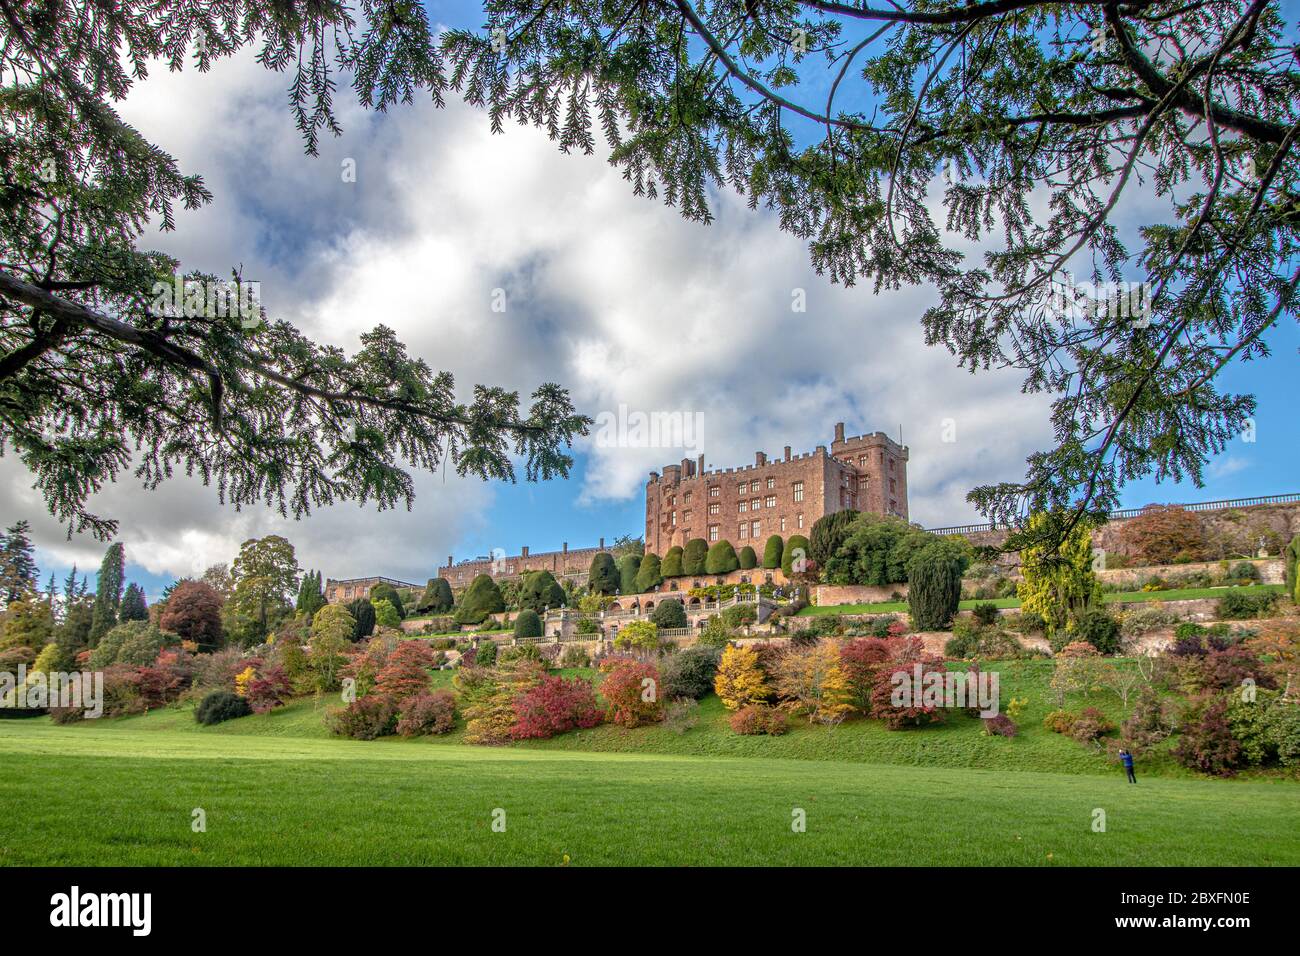 Images of beautiful Powis Castle and garden near Welshpool in mid-Wales UK Stock Photo